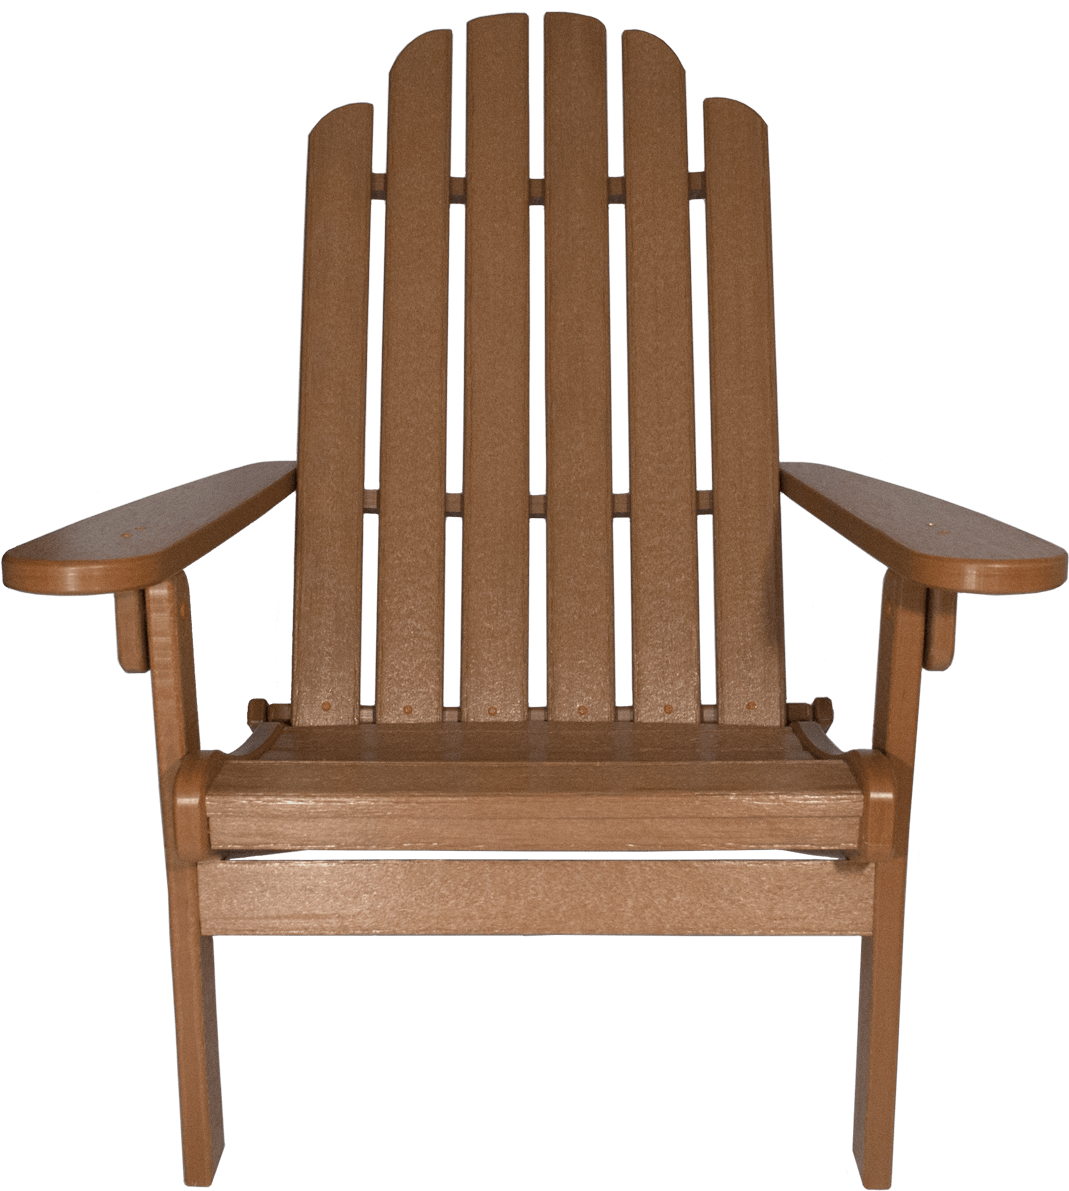 Wooden Antique Chair Free Photo PNG Image